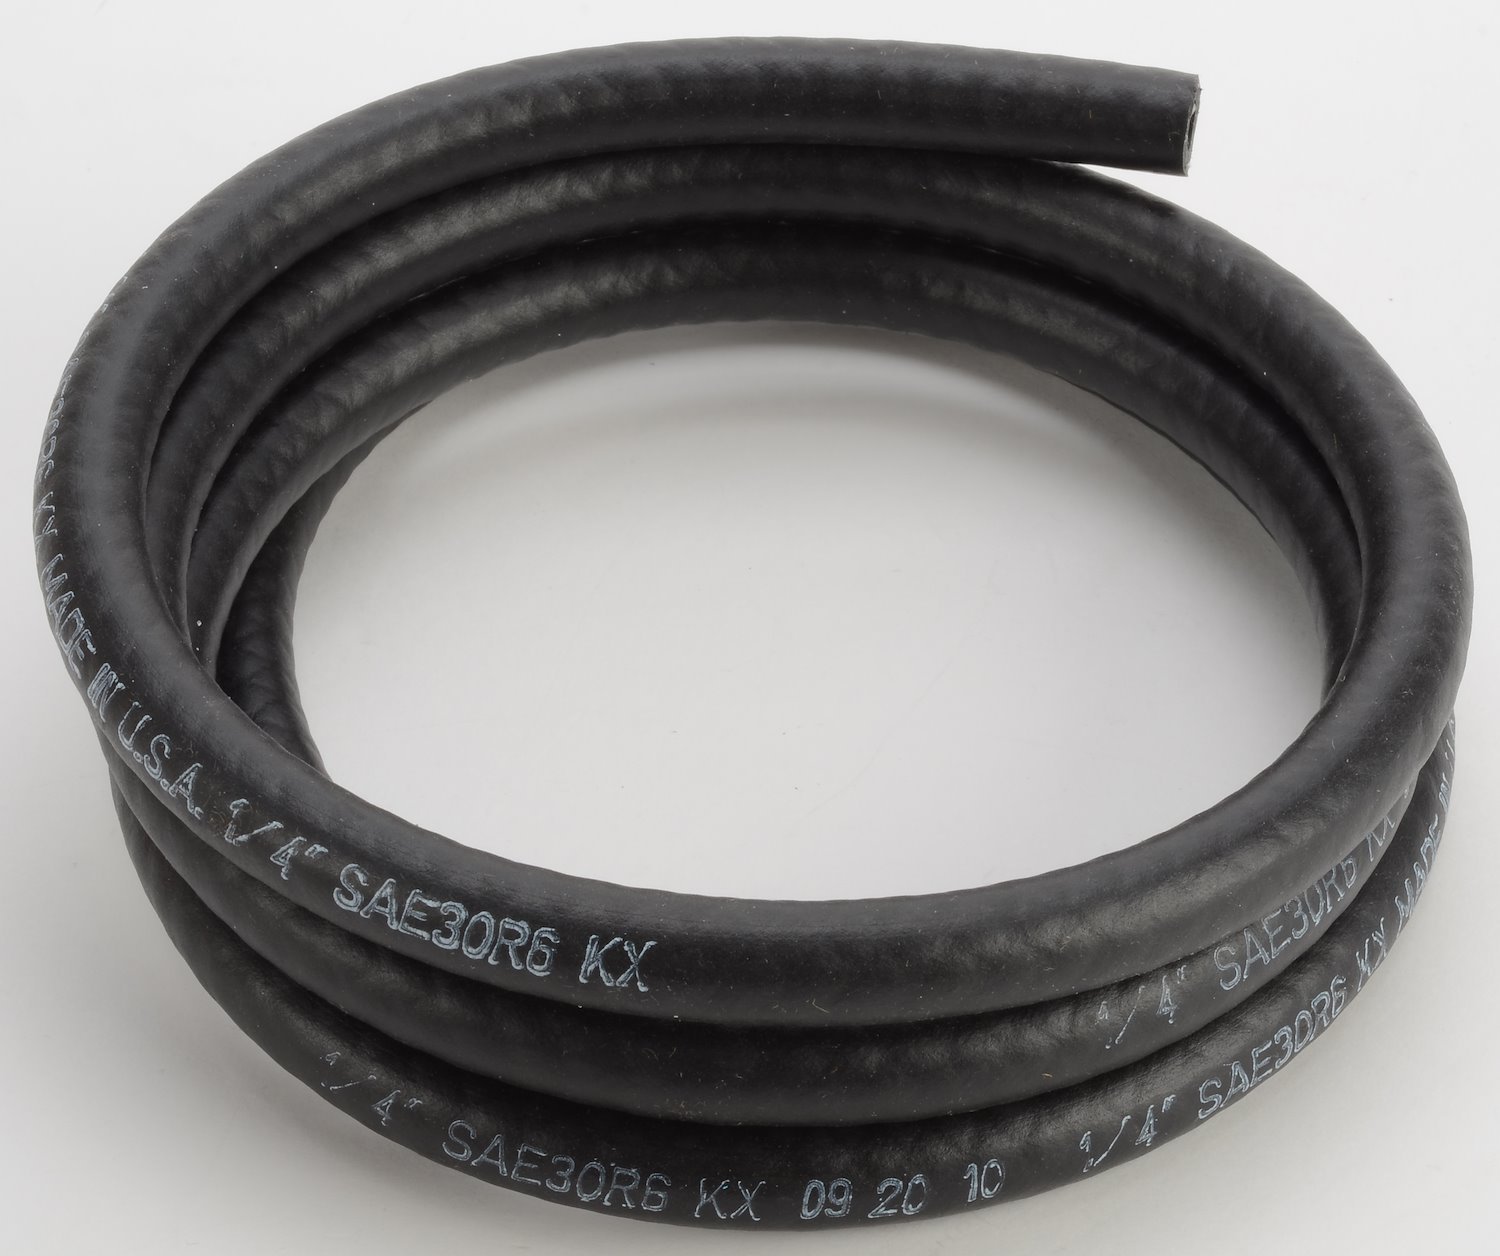 Universal Fuel Hose [1/4 in. I.D. x 5 ft.]